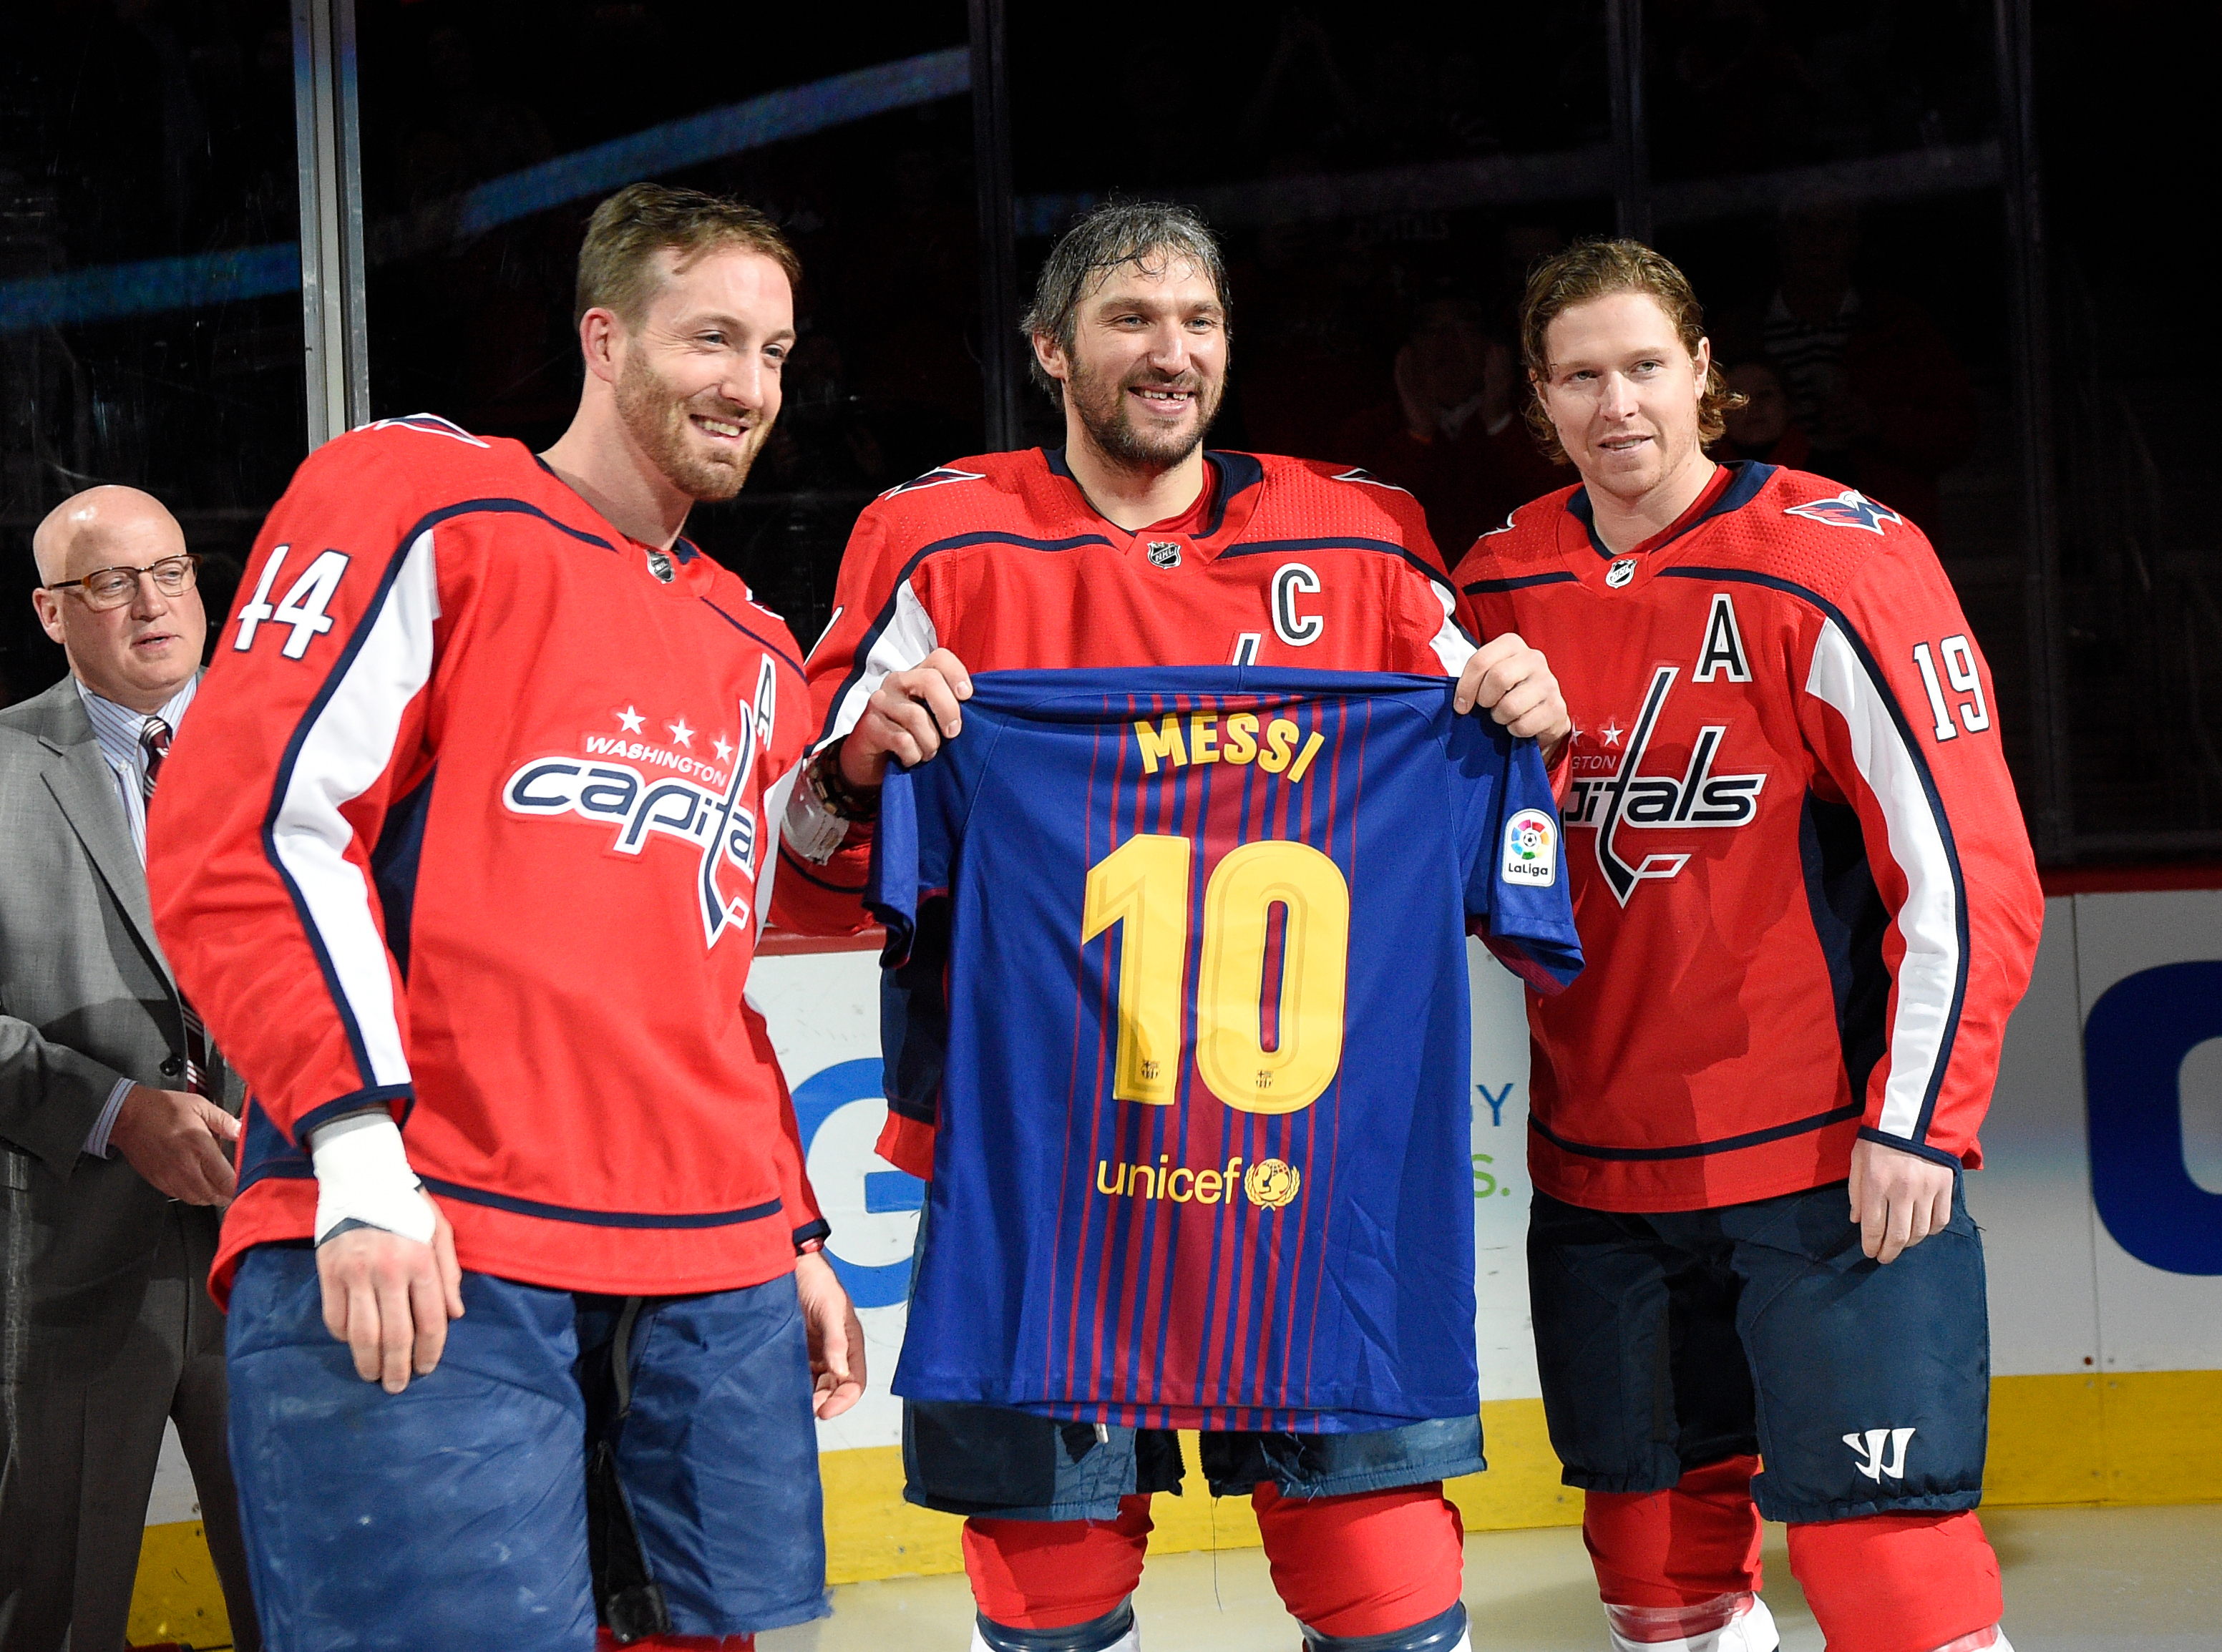 Ovechkin, Backstrom's KHL team wins Cup